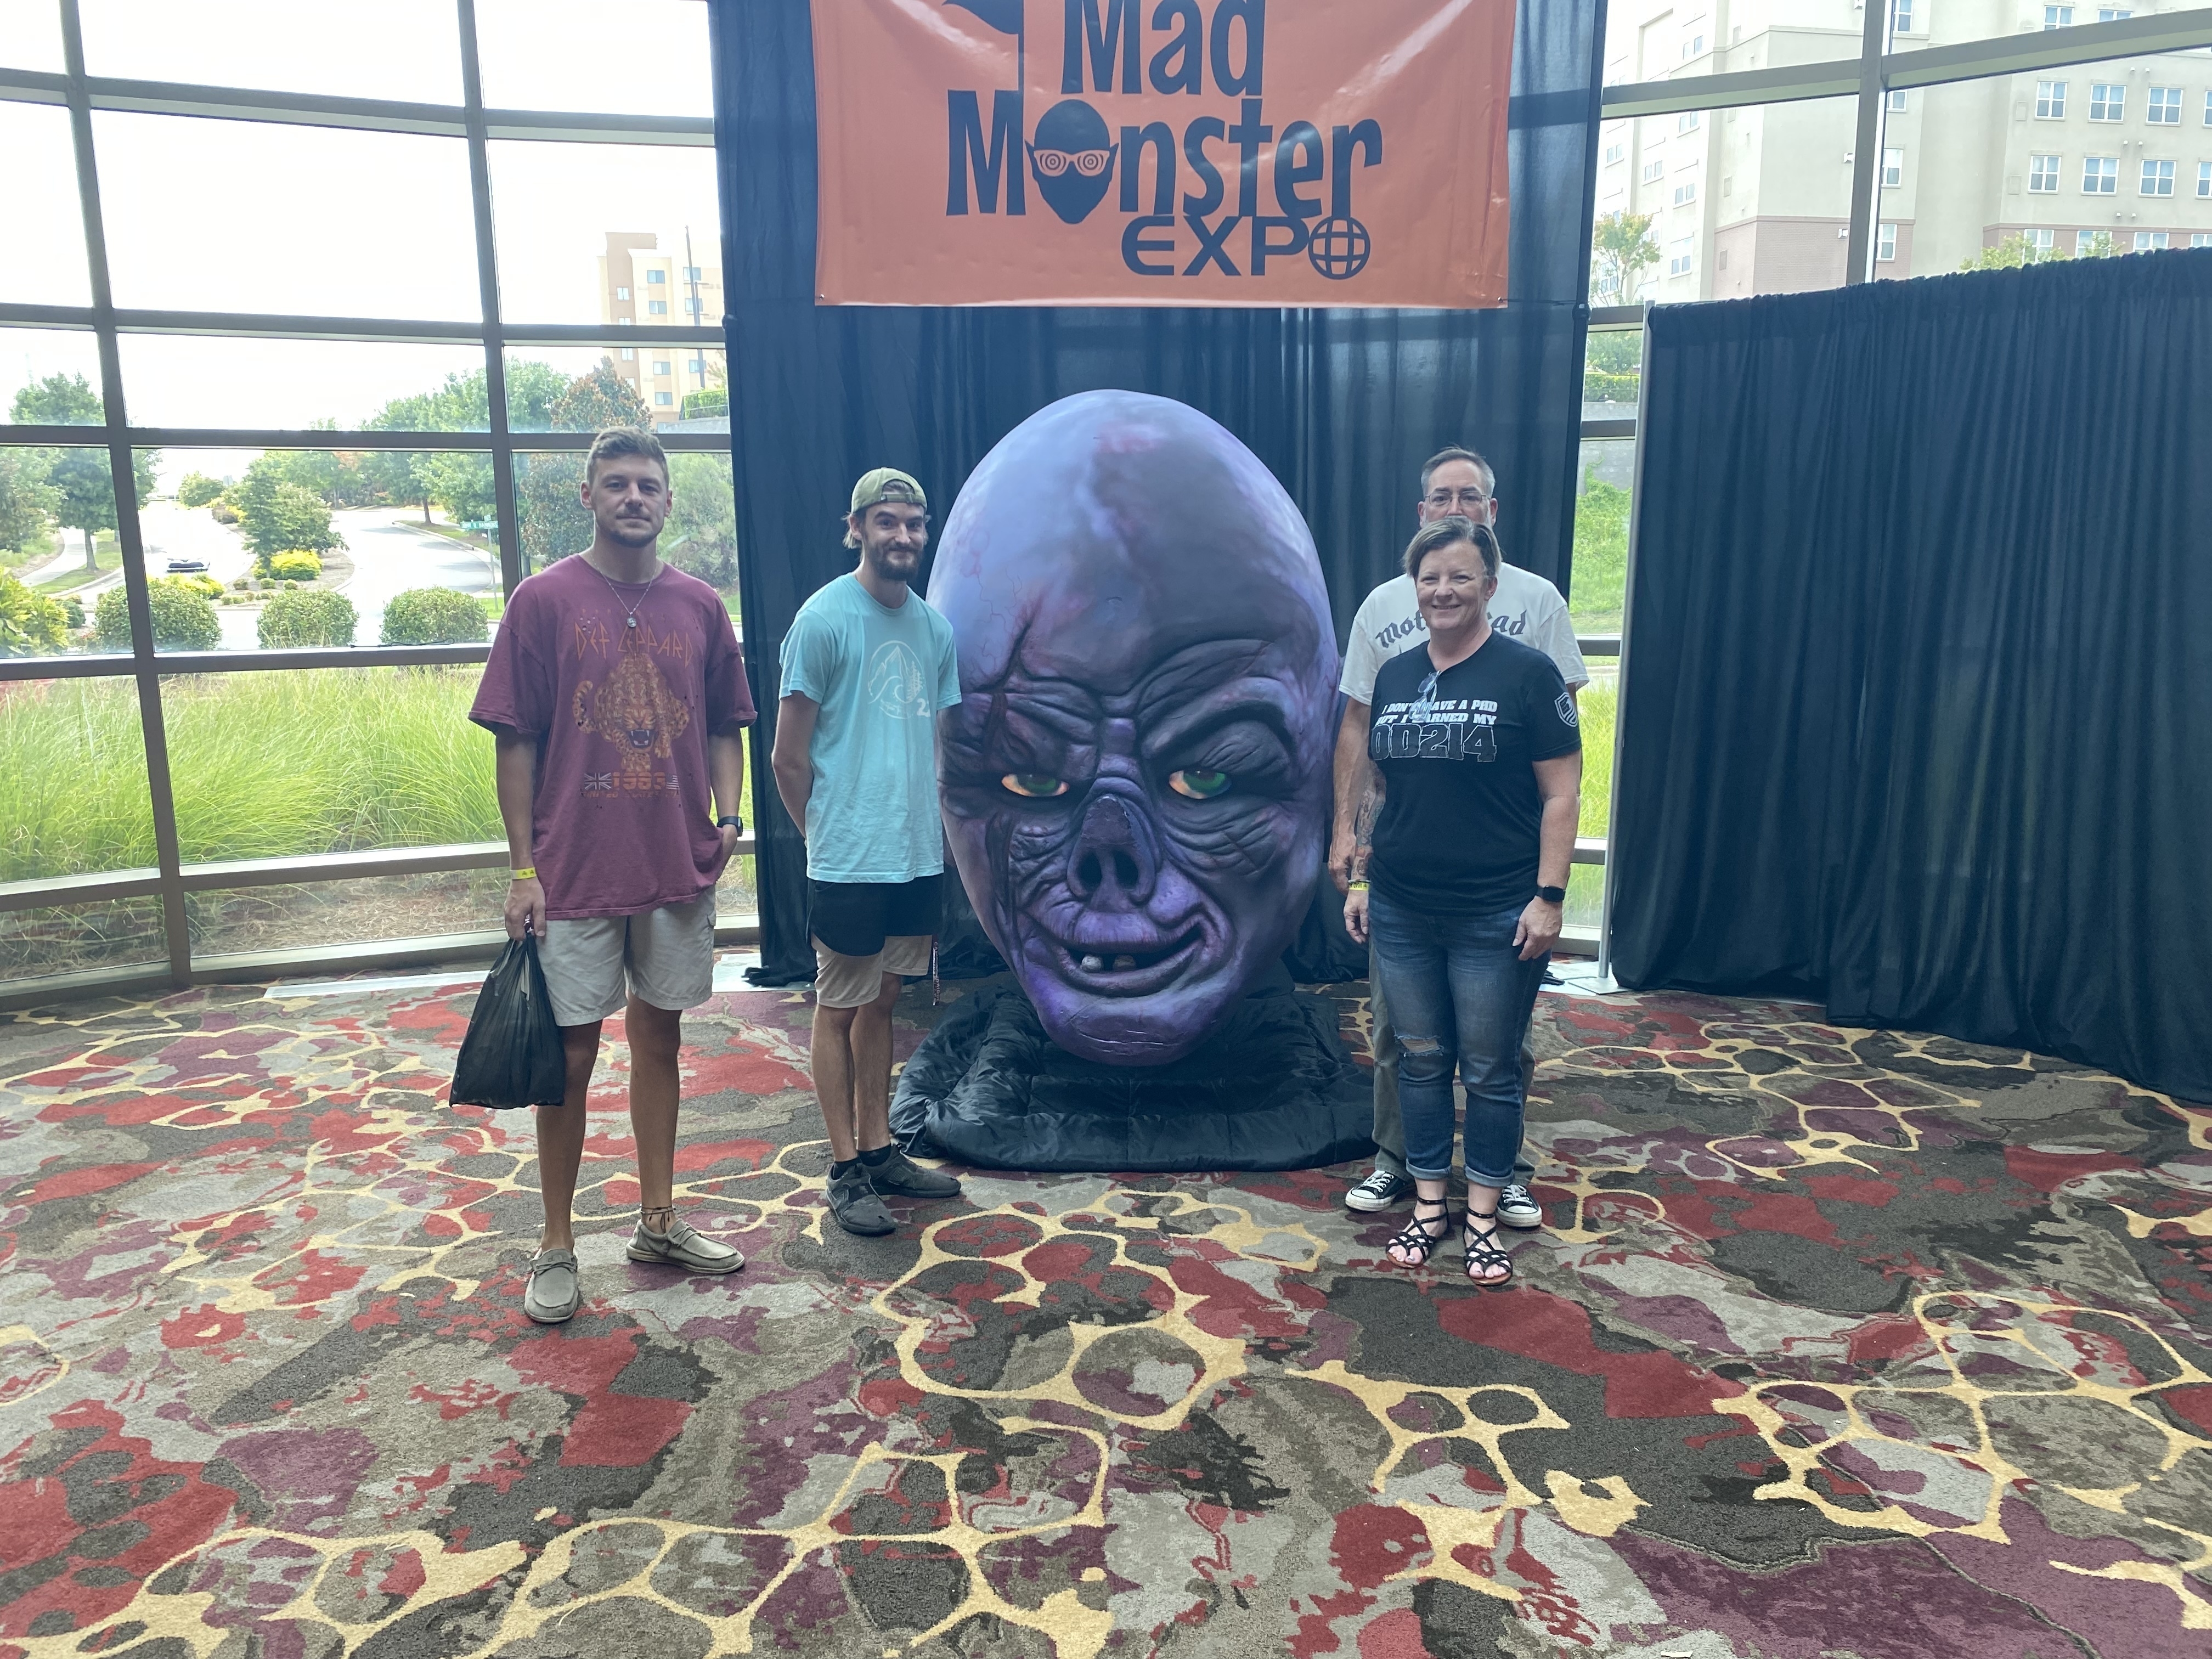 Mad Monster Expo